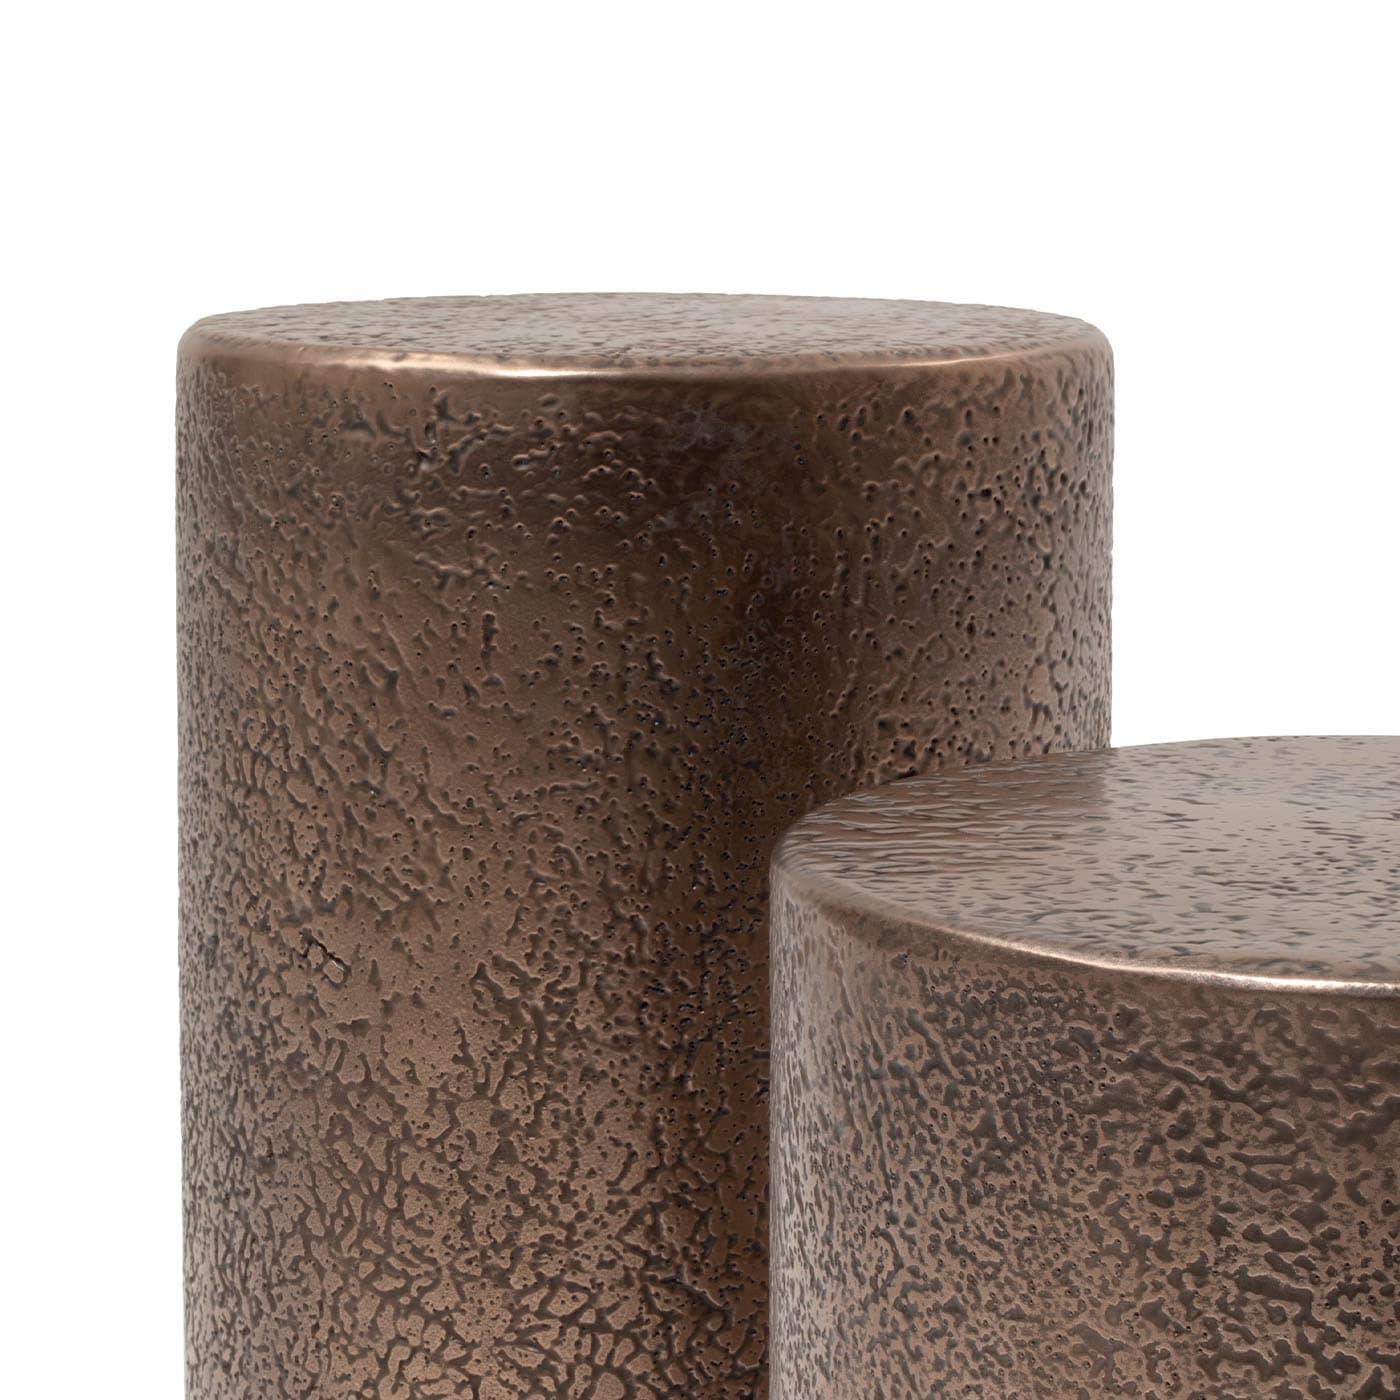 Discover this side table that gives a perfect addition to any modern interior. It counterbalances its cylindrical silhouette's simplicity with its embossed texture's dynamism. Realized in bronzed liquid metal, a combination lending the design